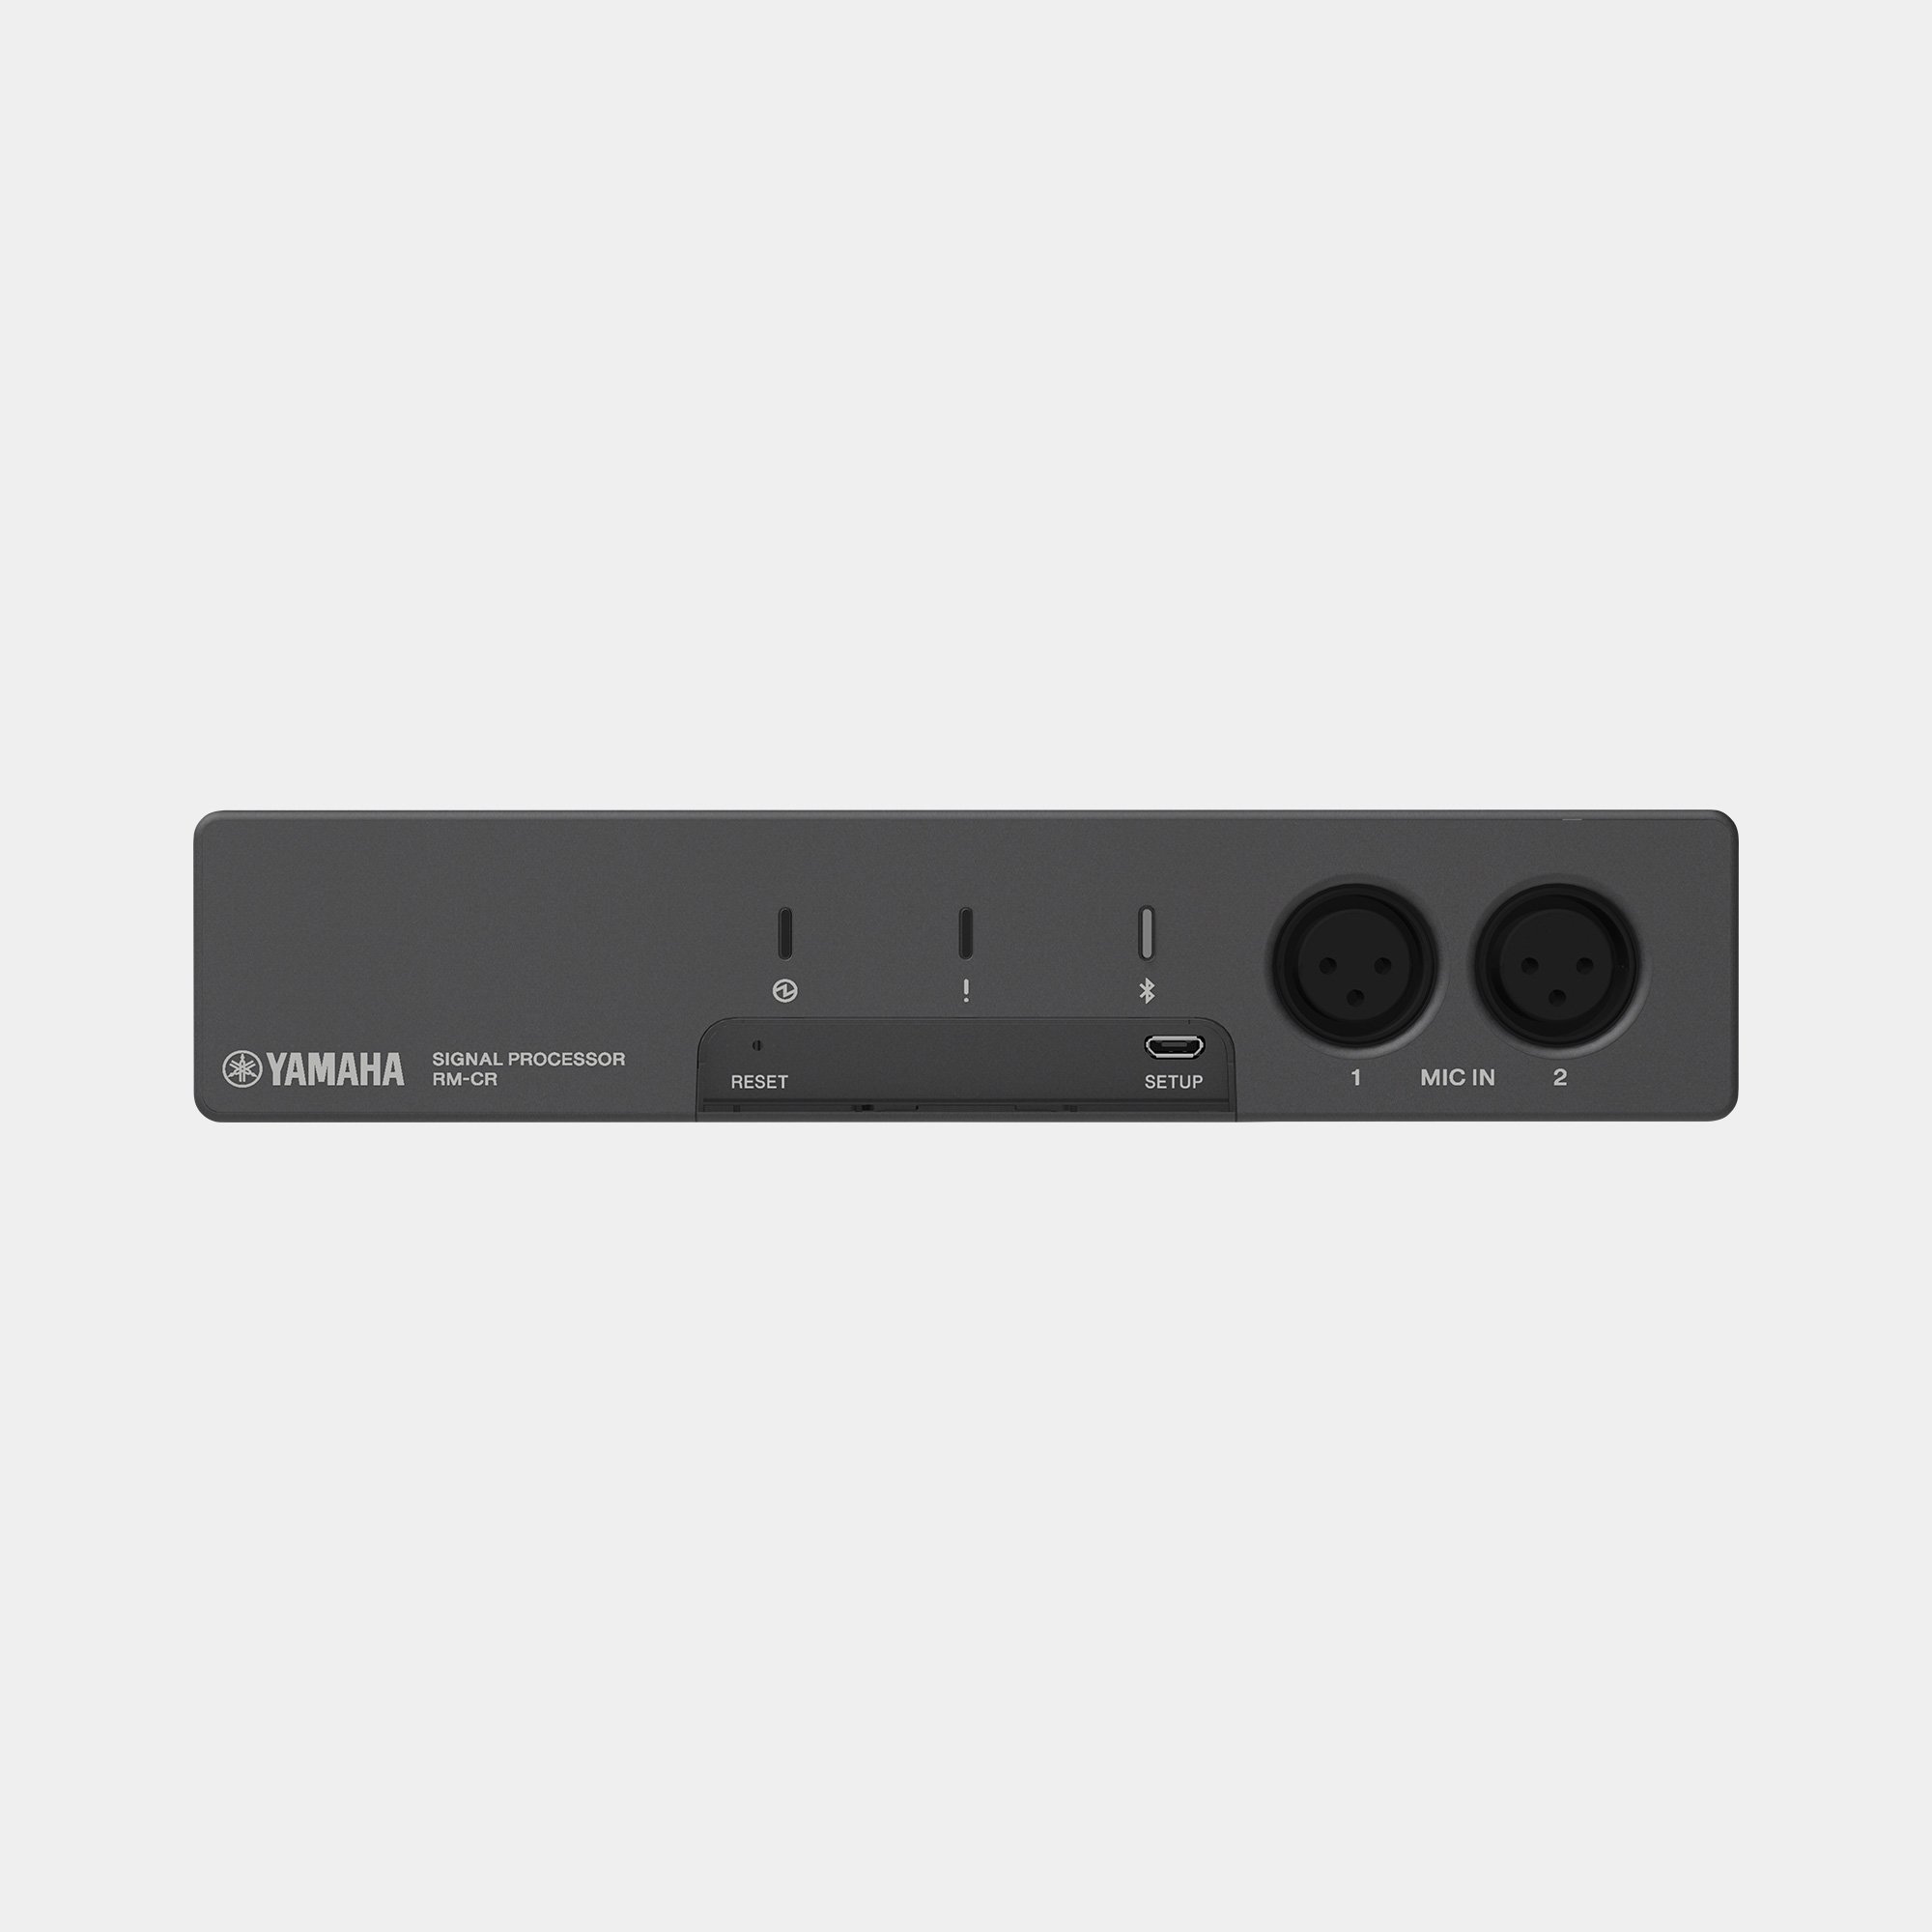 Thiết bị Remote Conference Processor YAMAHA RM-CR